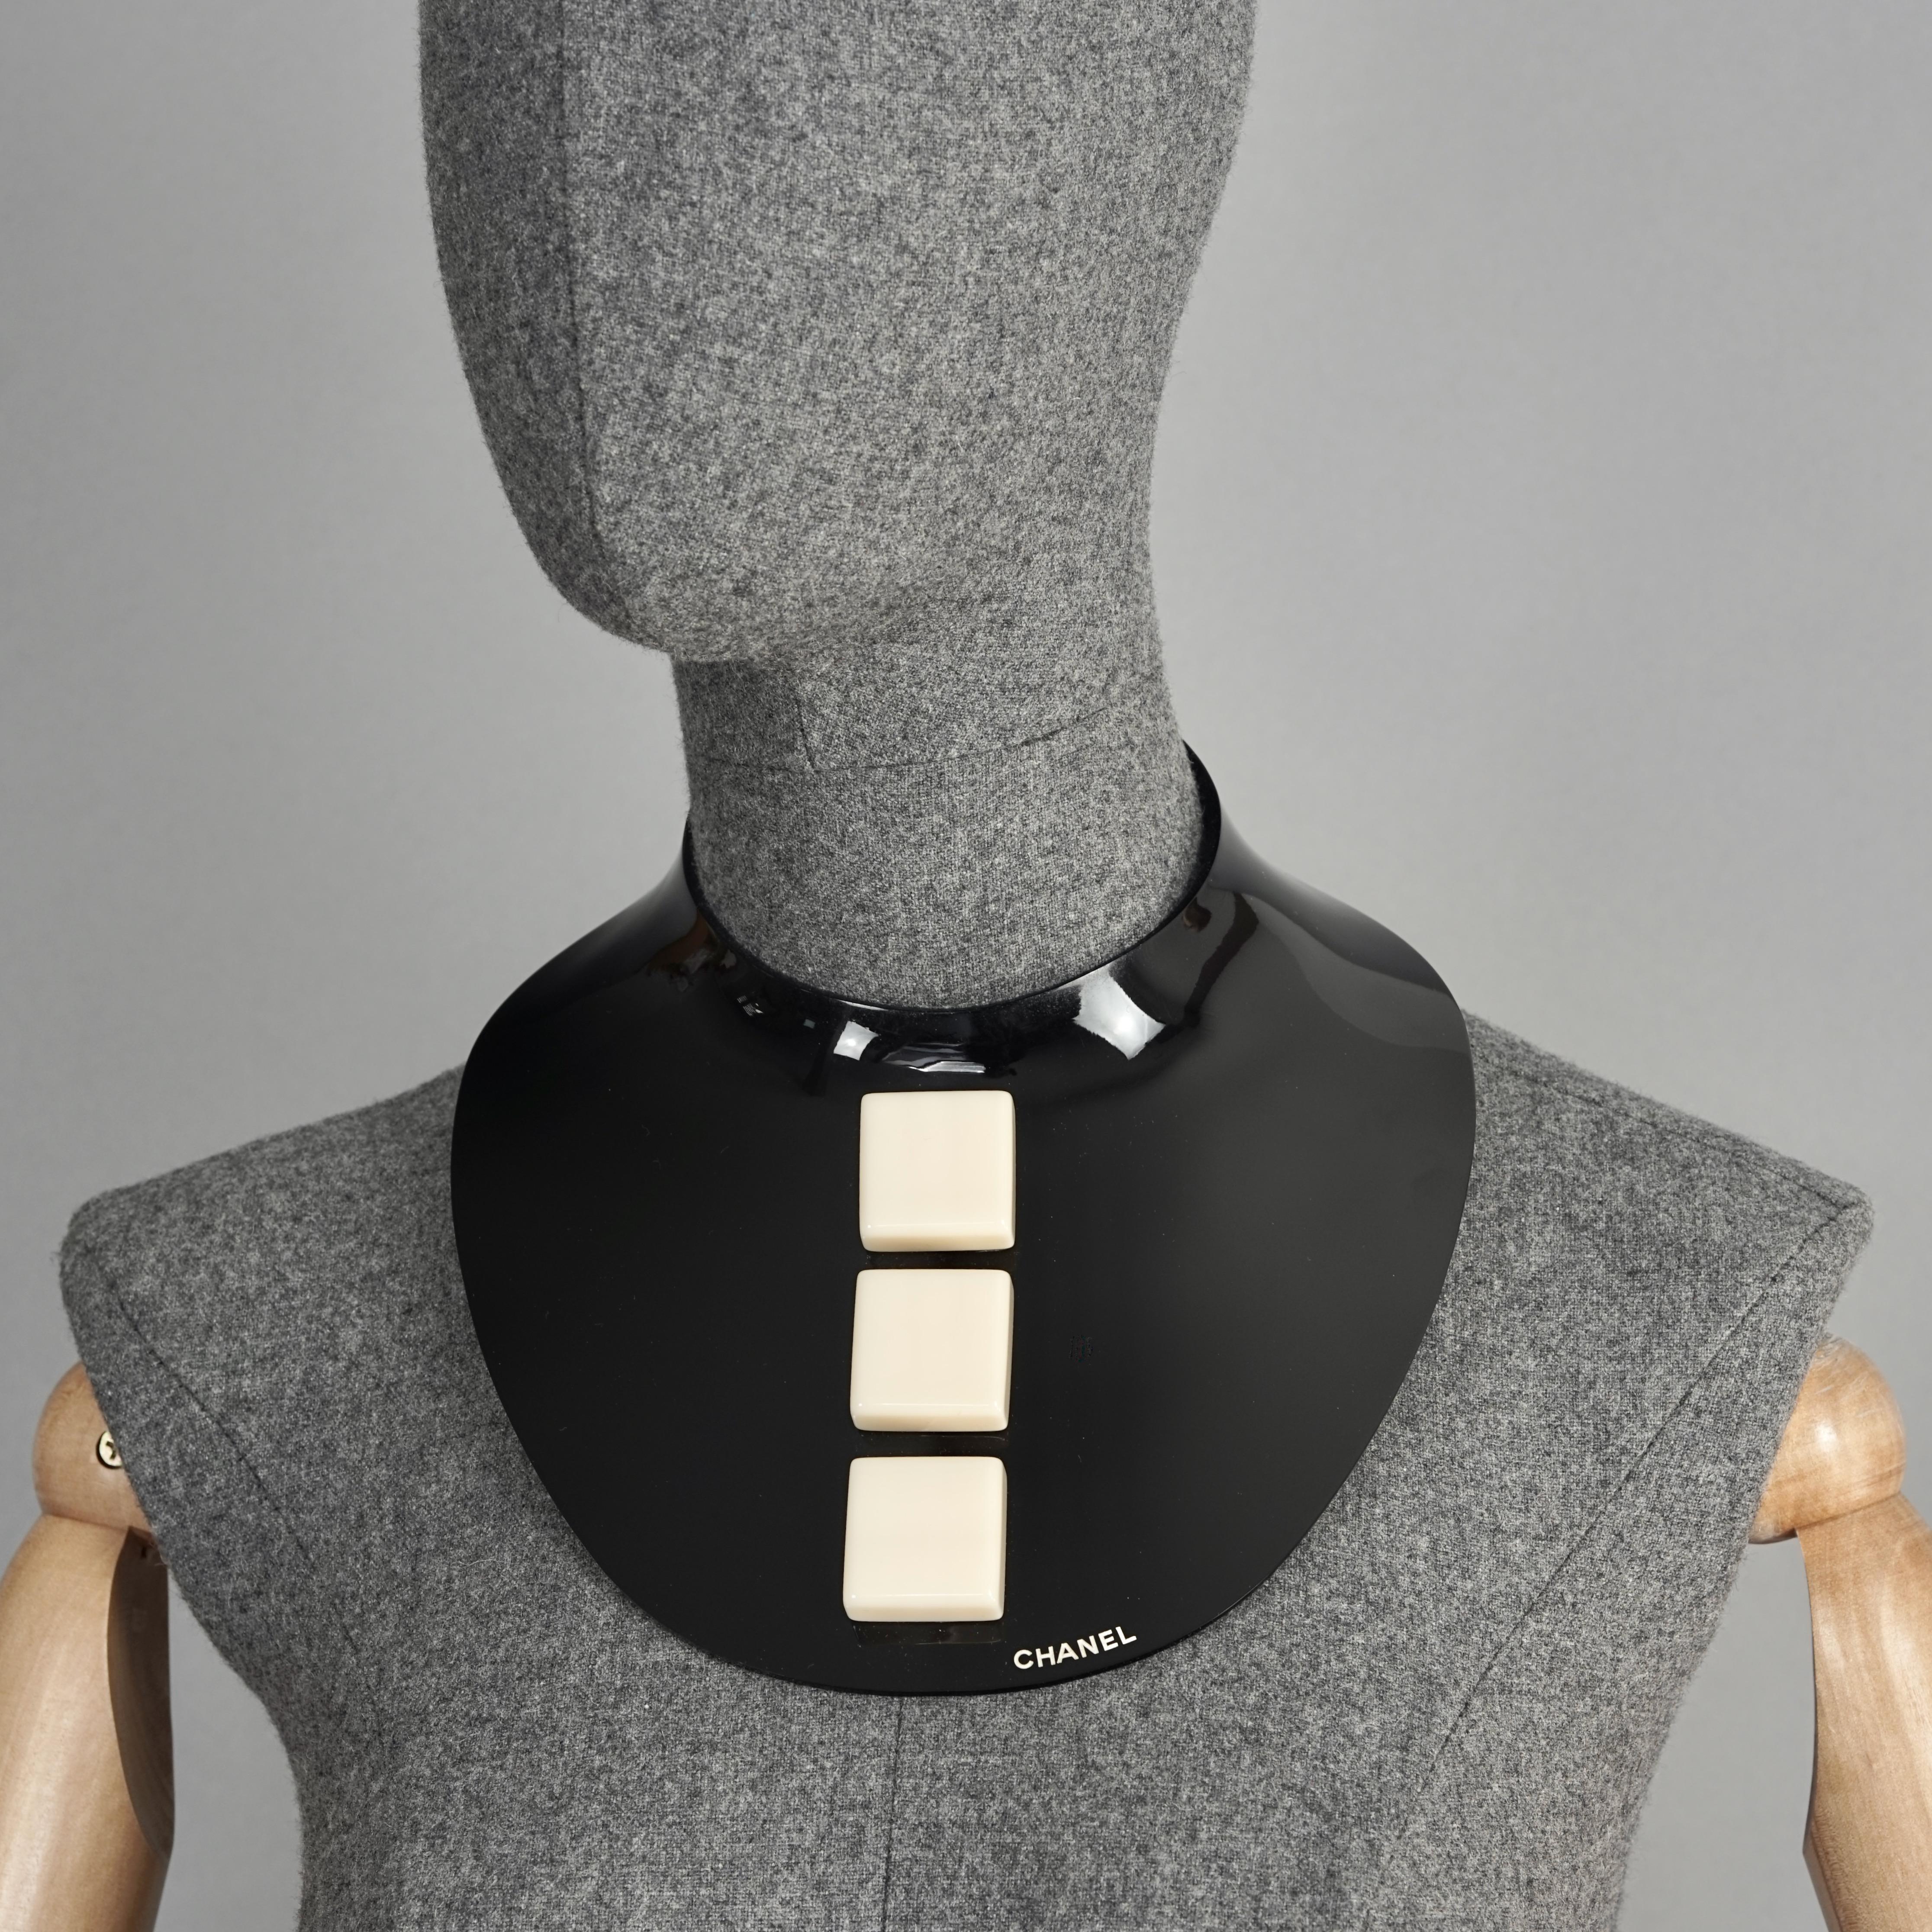 CHANEL FALL 2007 Black and White Resin Breastplate Choker Necklace For Sale 3